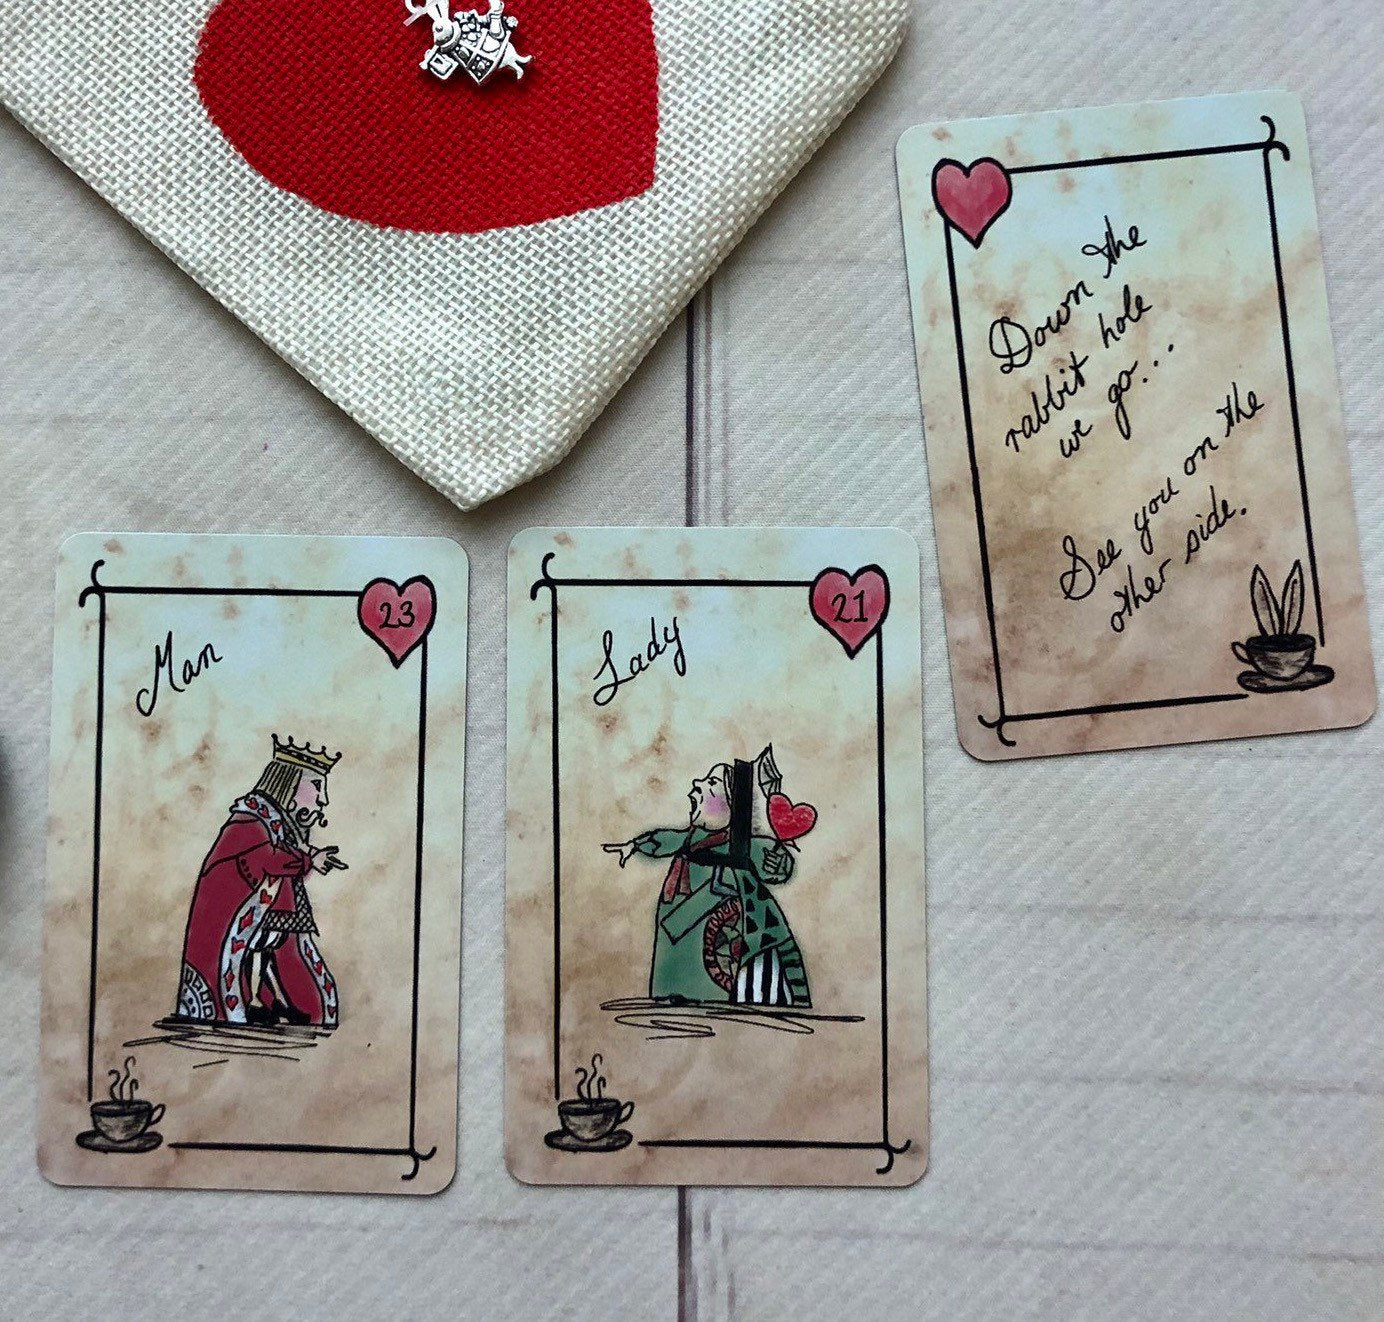 Tea leaf reading cards. These are just like an extended Lenormand oracle card deck. These are most common tea leaf reading symbols that are commonly found in teacups. Use any tarot card layouts & you get a free how to use course. Alice in Wonderland